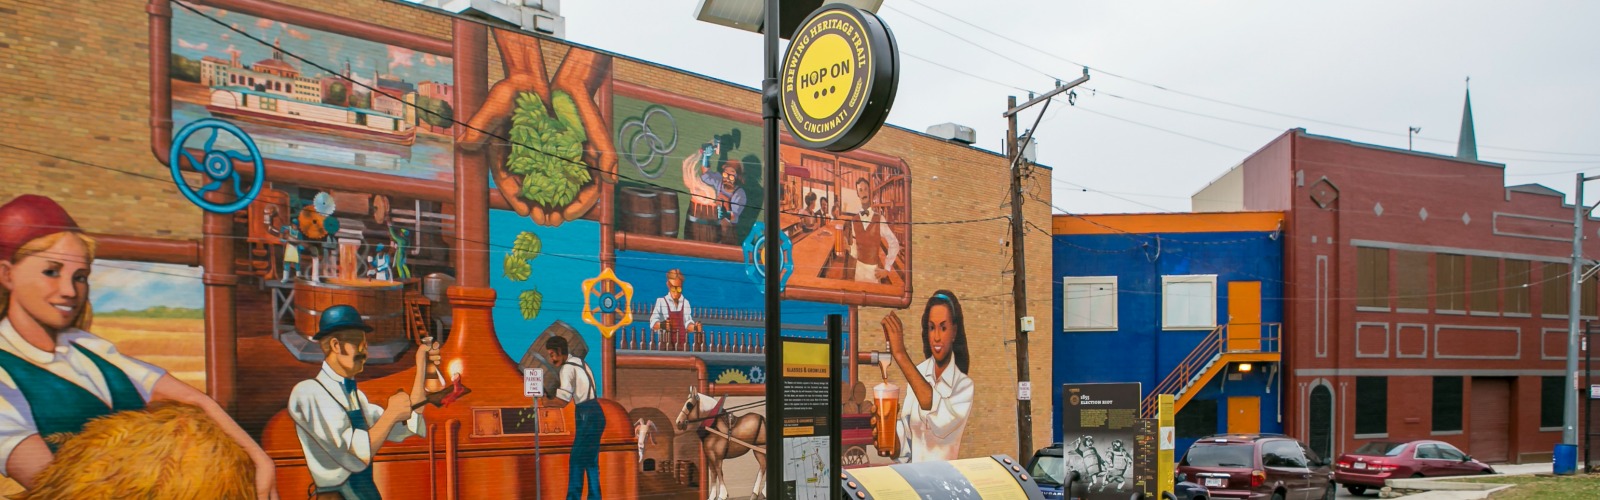 The Brewing Heritage Trail in Over-the-Rhine